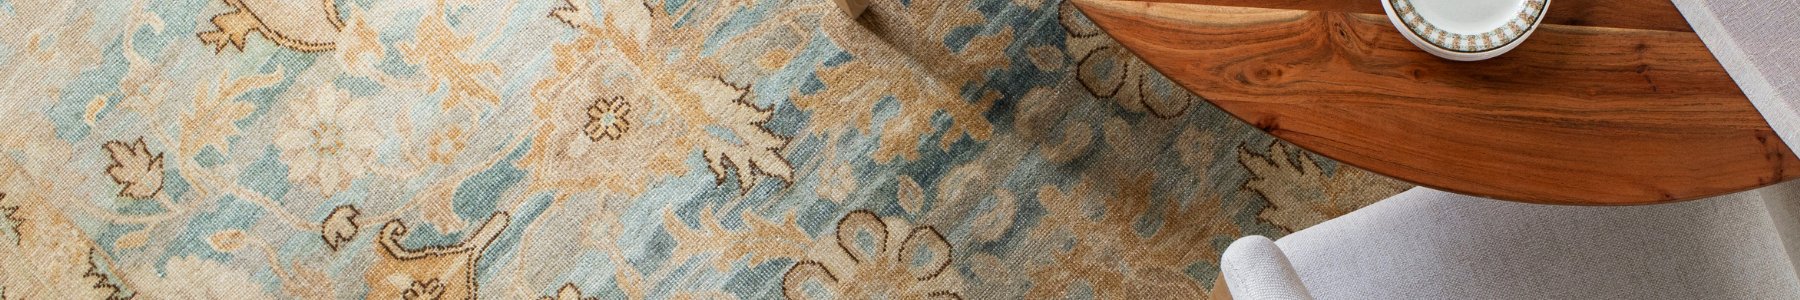 Dining Room Rugs - Rug & Home